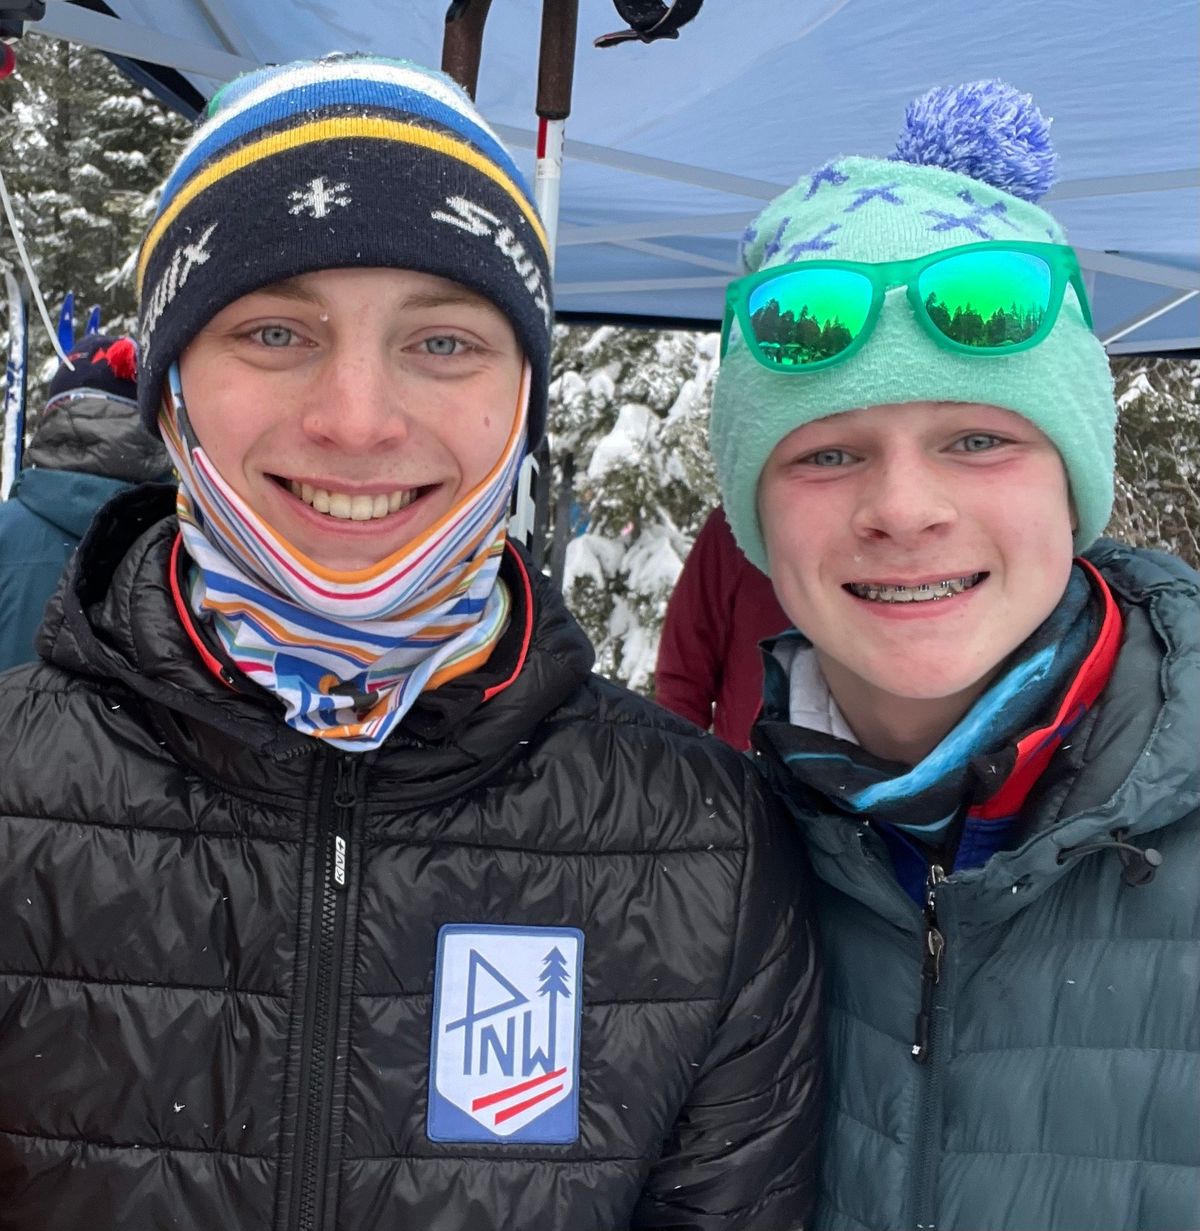 Isaac, left, and Aaron Pooler will compete in the U.S. Ski and Snowboard Cross Country Junior National Championships in Lake Placid, New York, this week. 